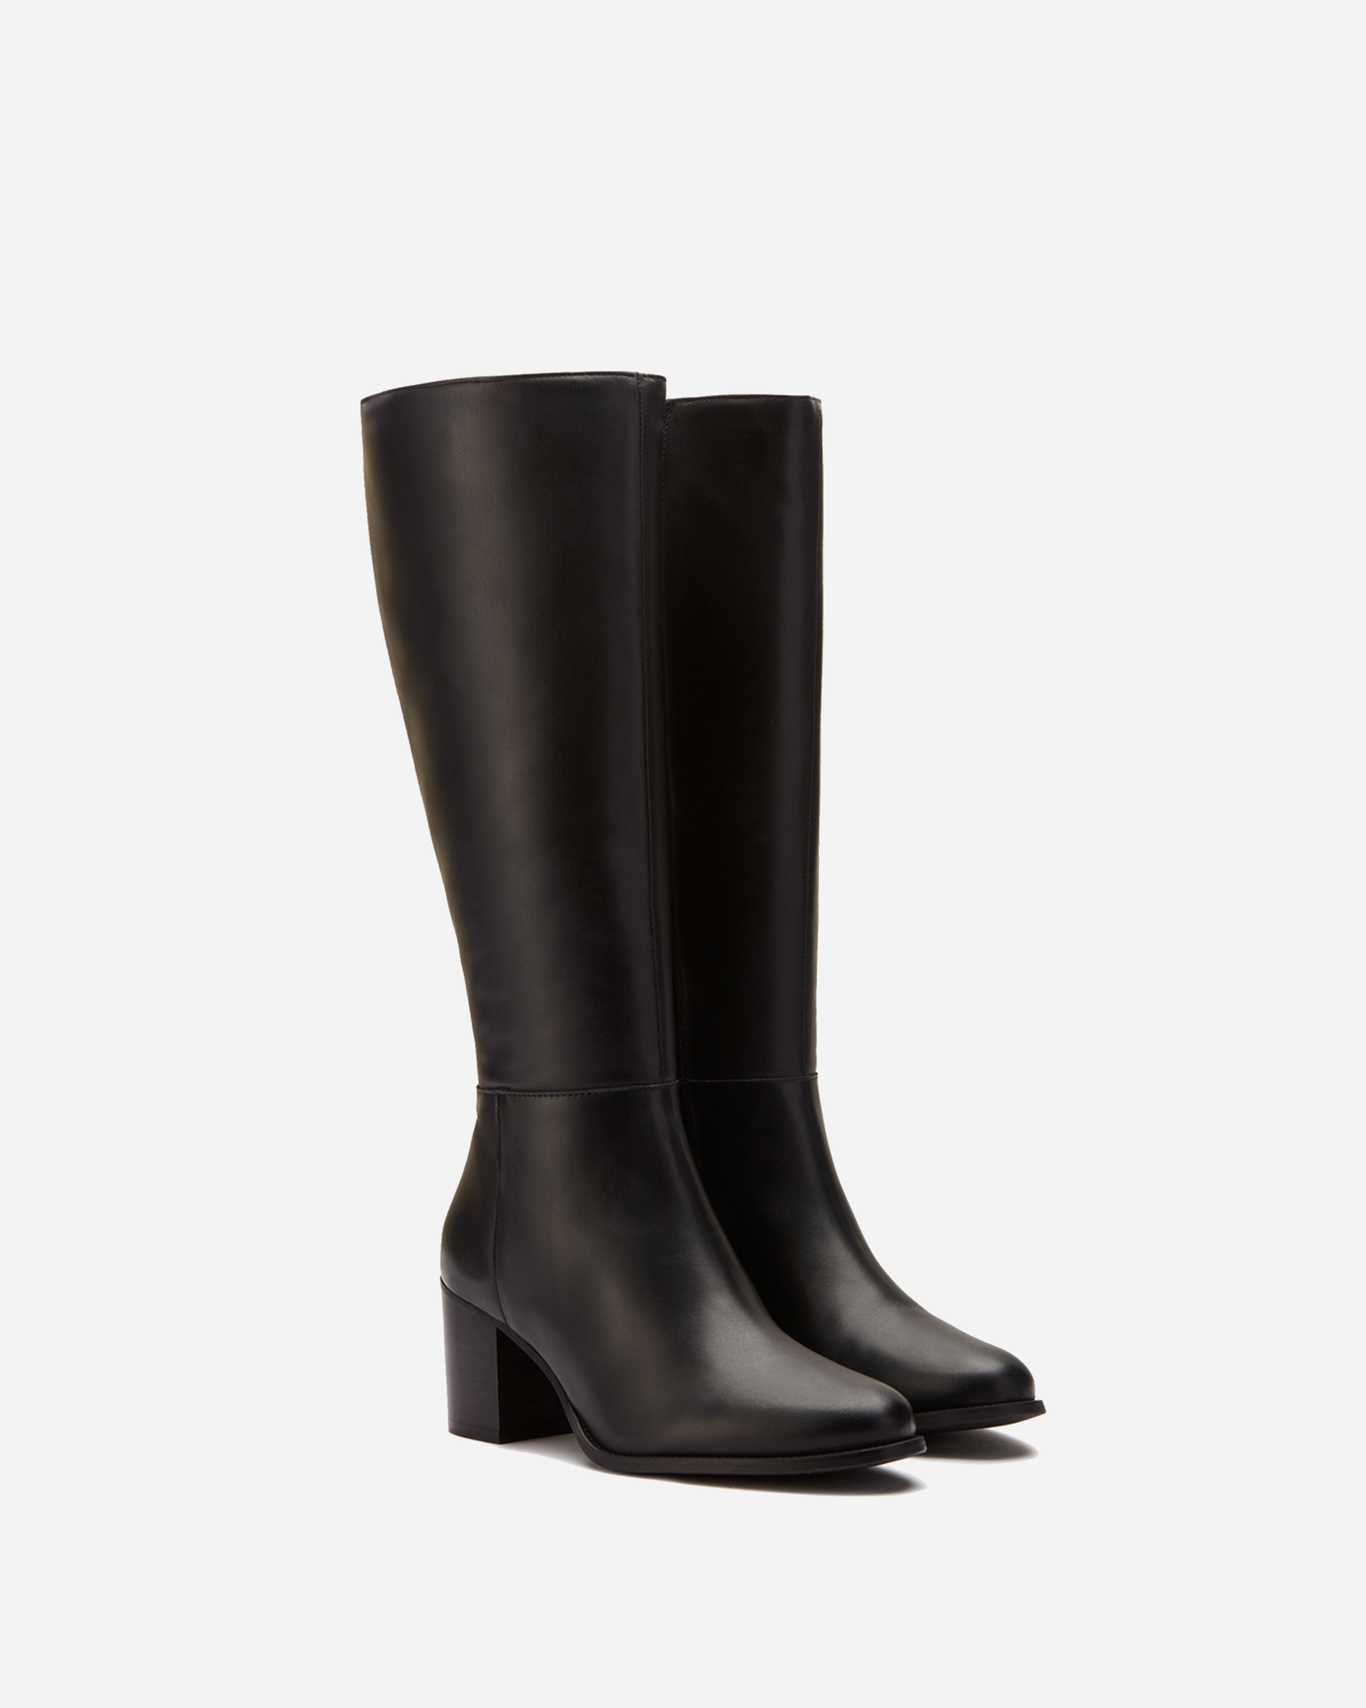 Dalia Standard Knee High Boots in Black Leather – DuoBoots